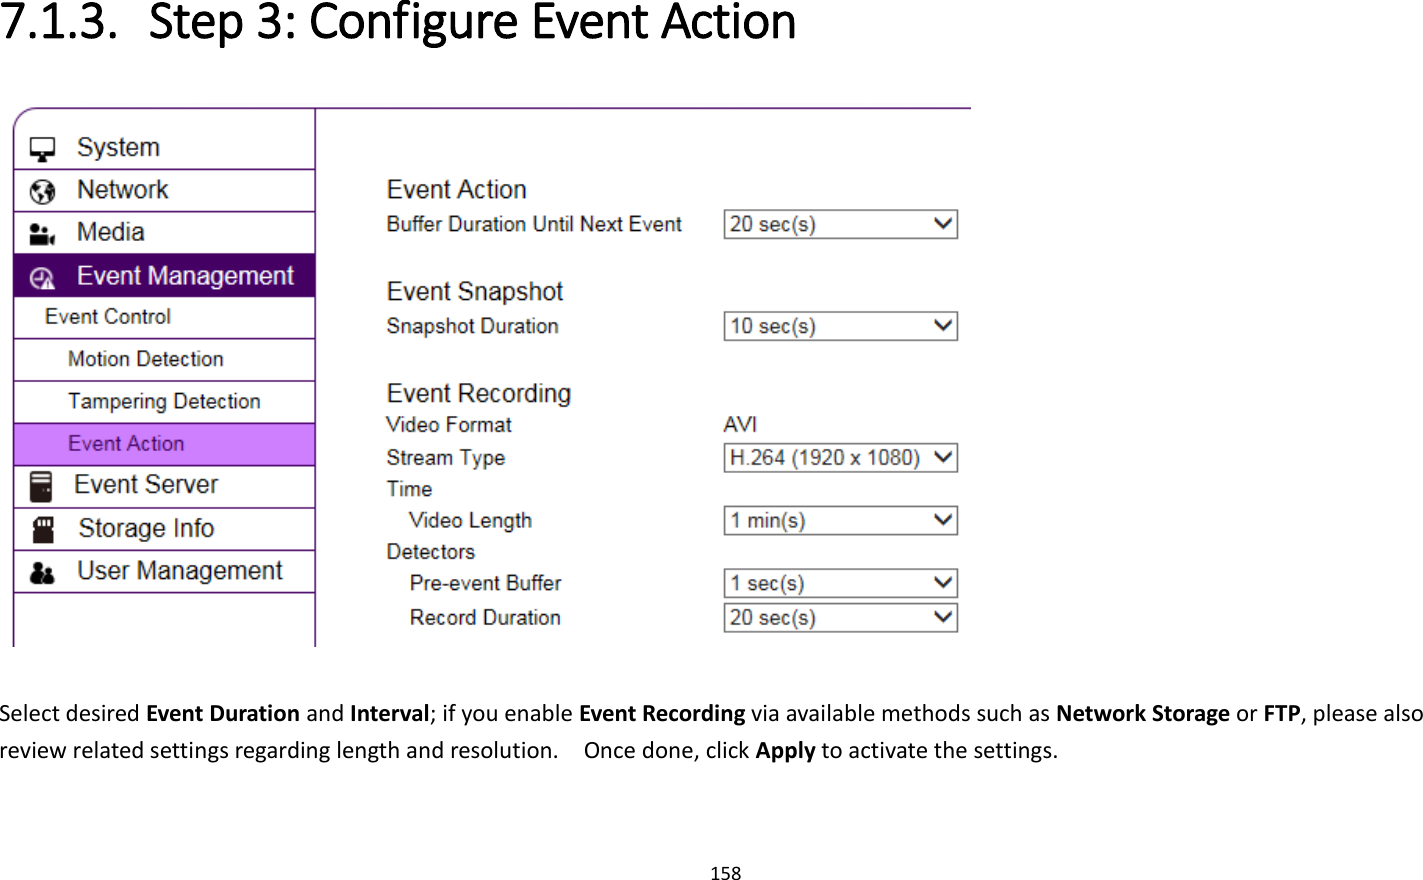 158  7.1.3. Step 3: Configure Event Action   Select desired Event Duration and Interval; if you enable Event Recording via available methods such as Network Storage or FTP, please also review related settings regarding length and resolution.    Once done, click Apply to activate the settings. 